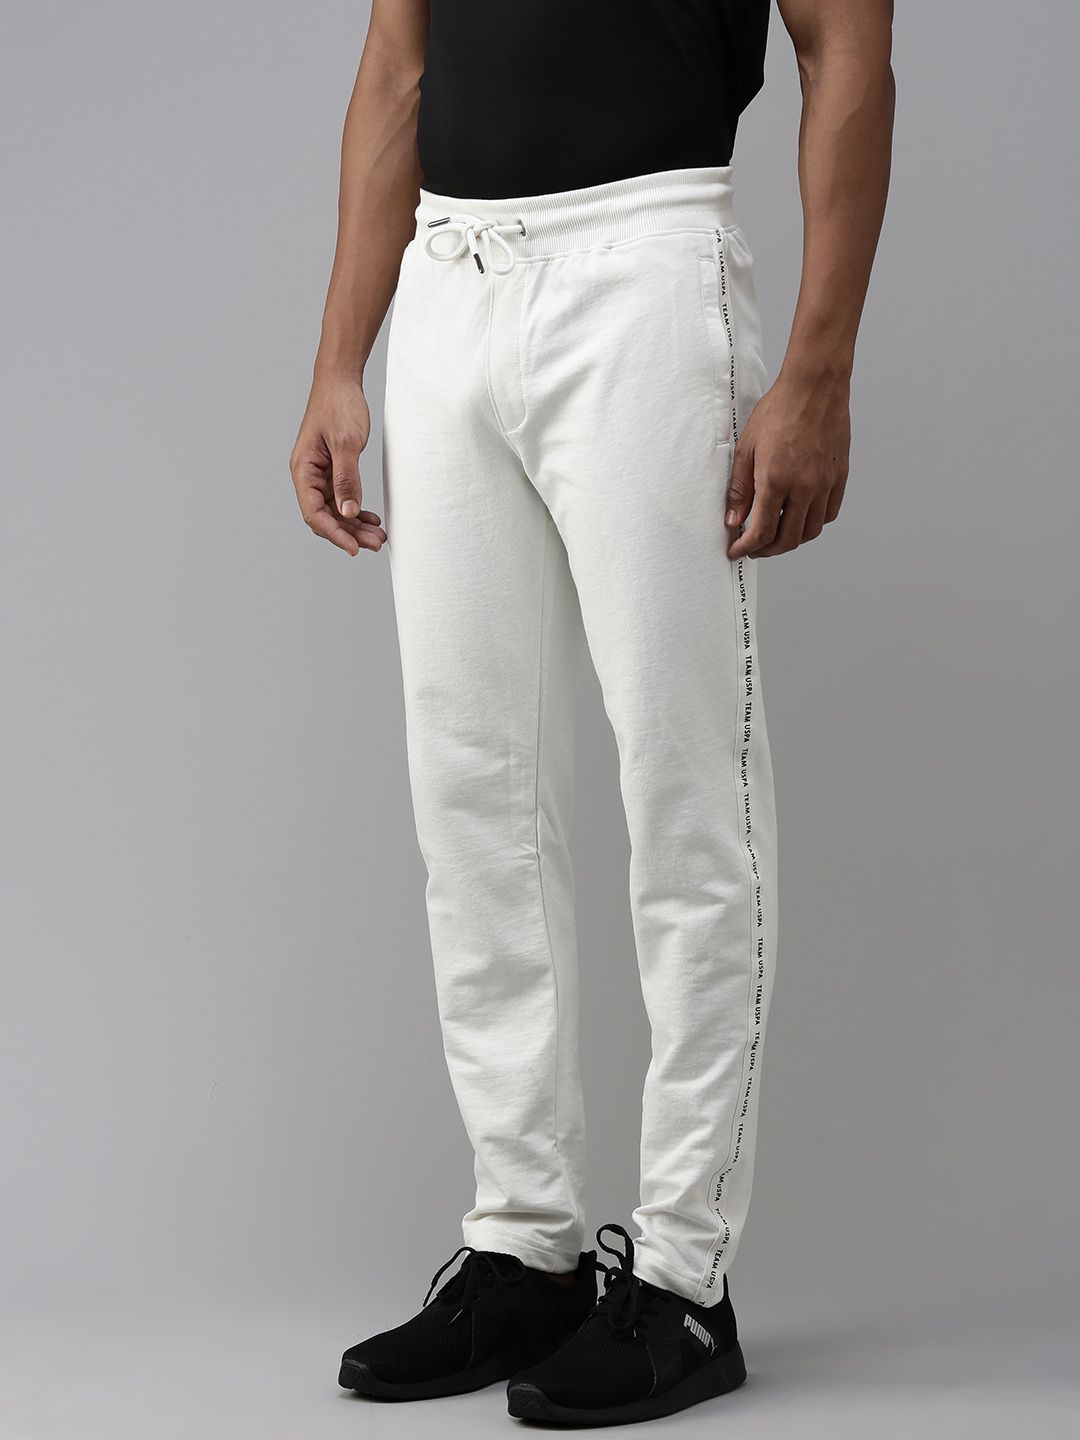 U.S. Polo Assn. Denim Co. Men Solid With Side Taping Detail